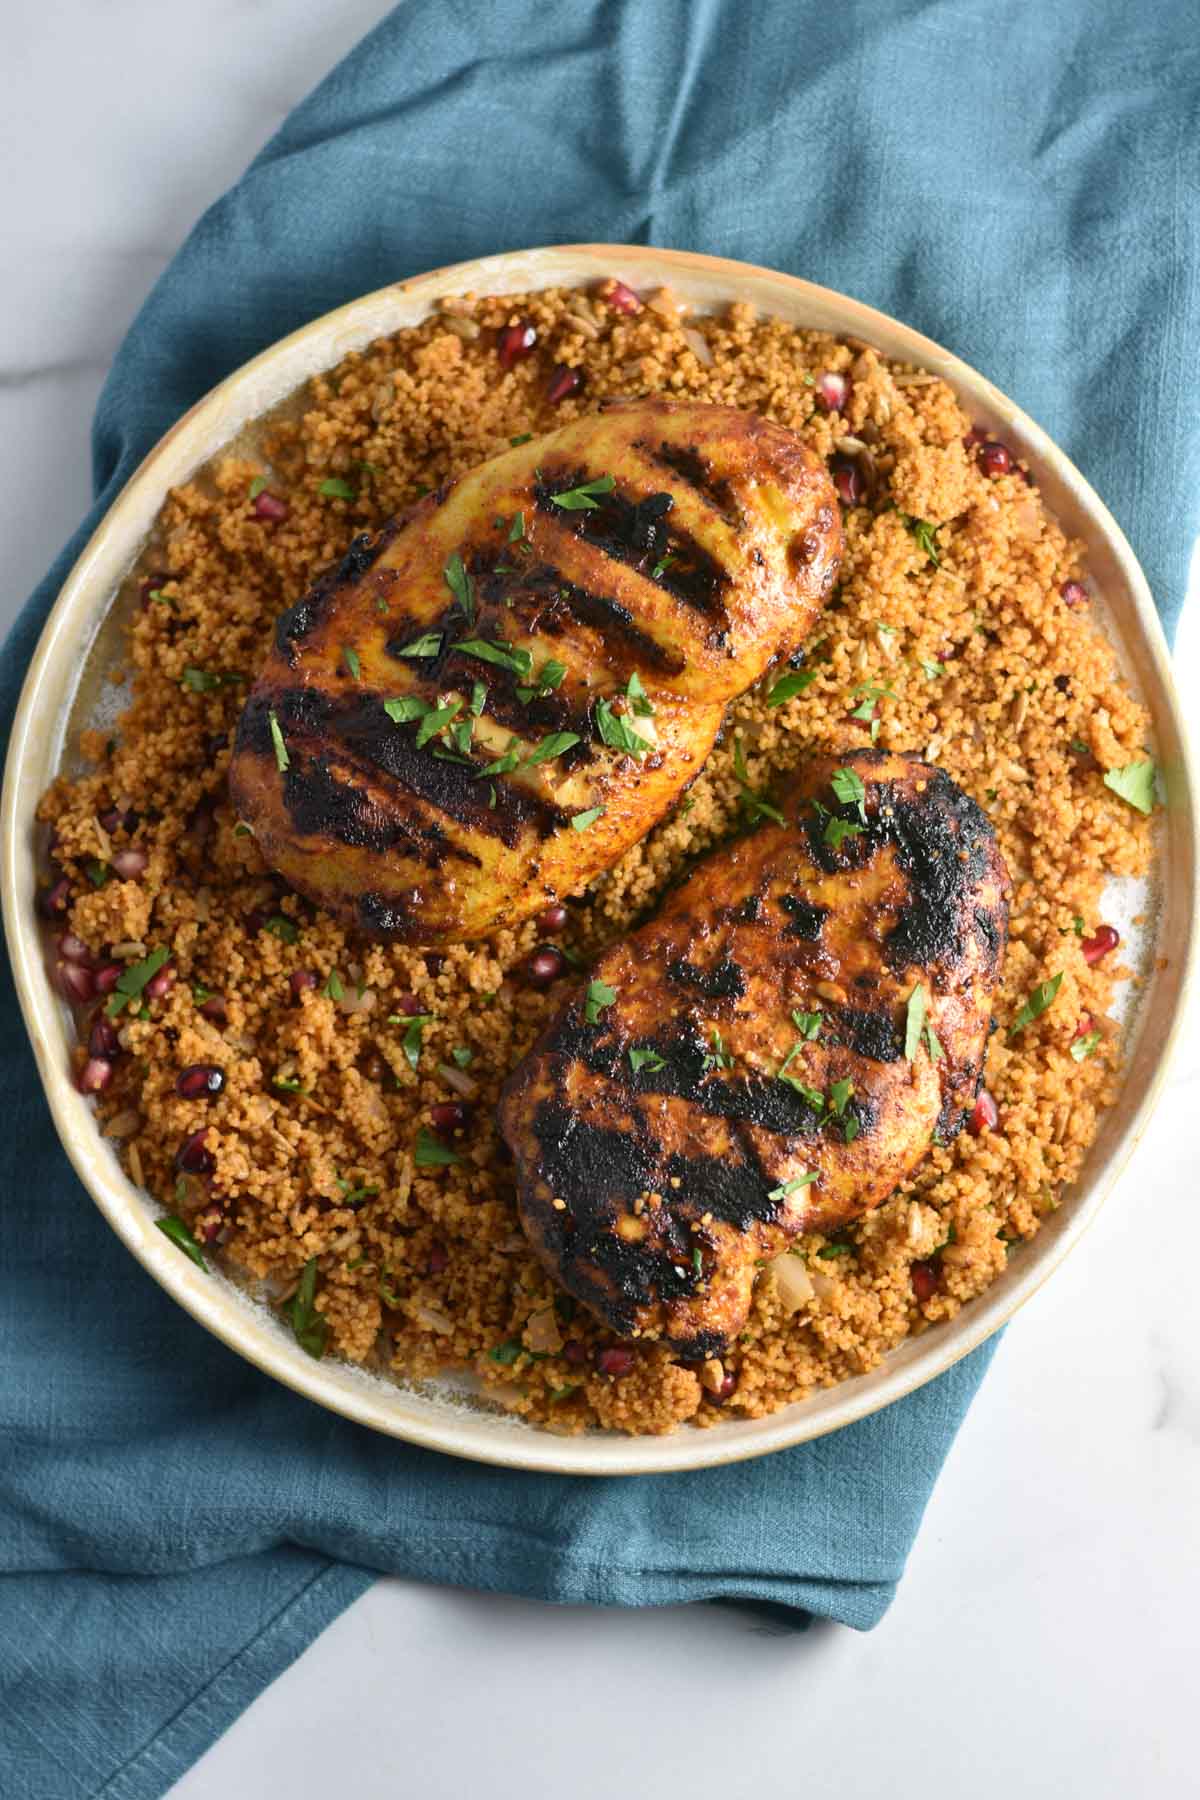 Grilled moroccan spiced chicken on a plate.